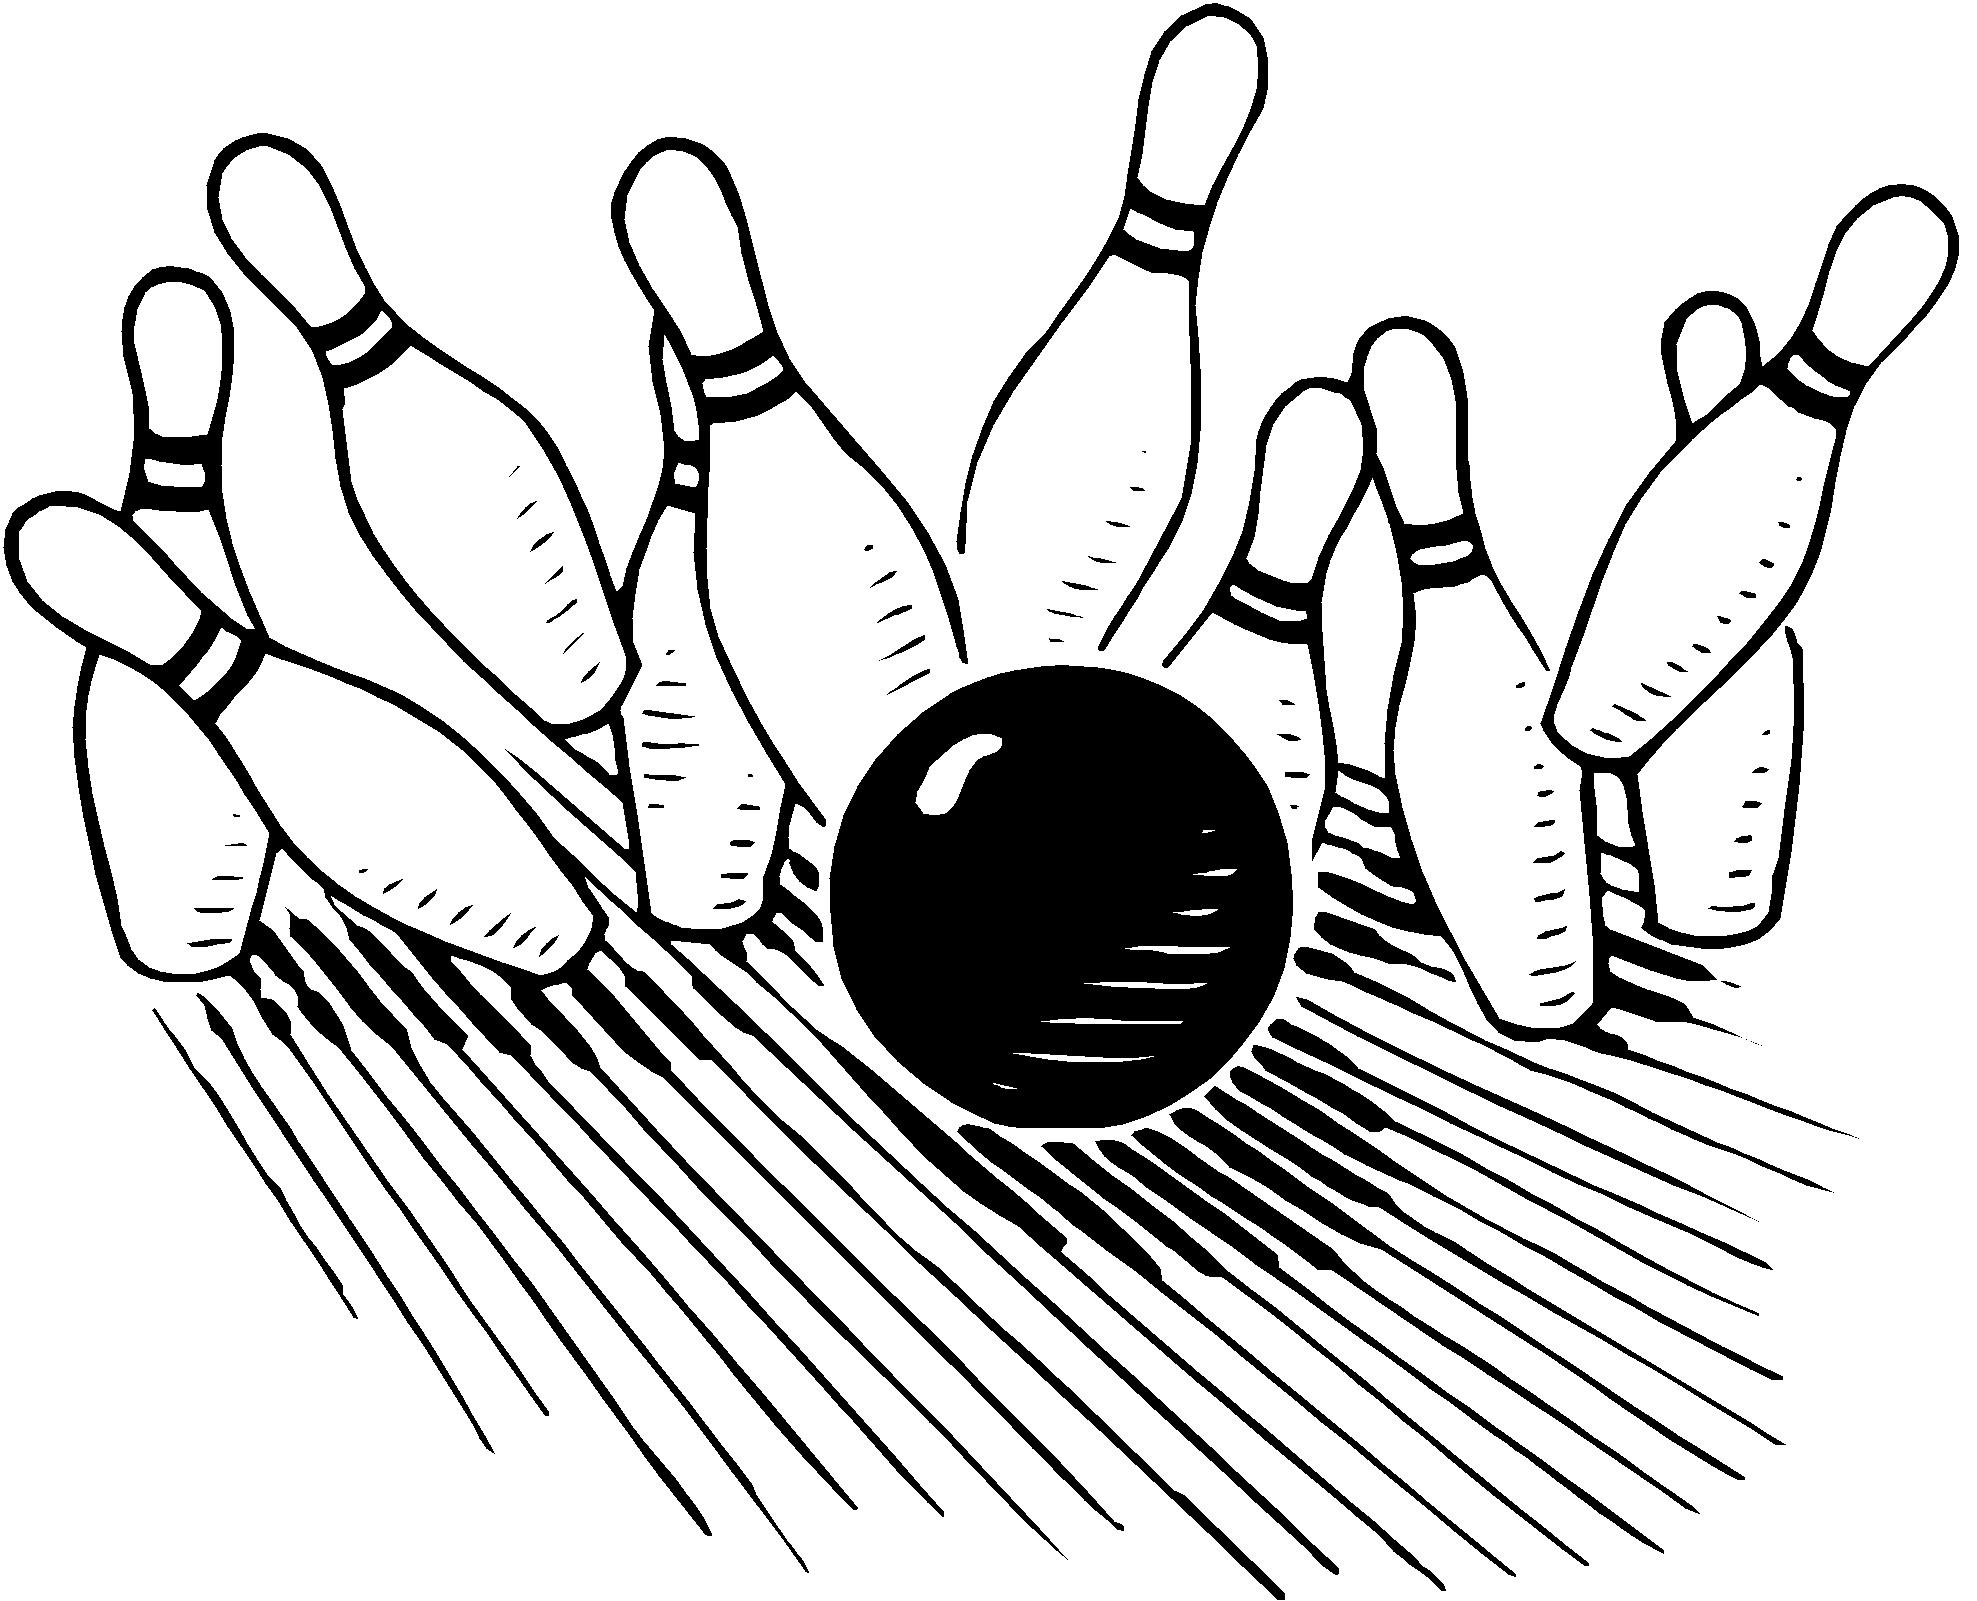 Free Clip Art Of Bowling - ClipArt Best